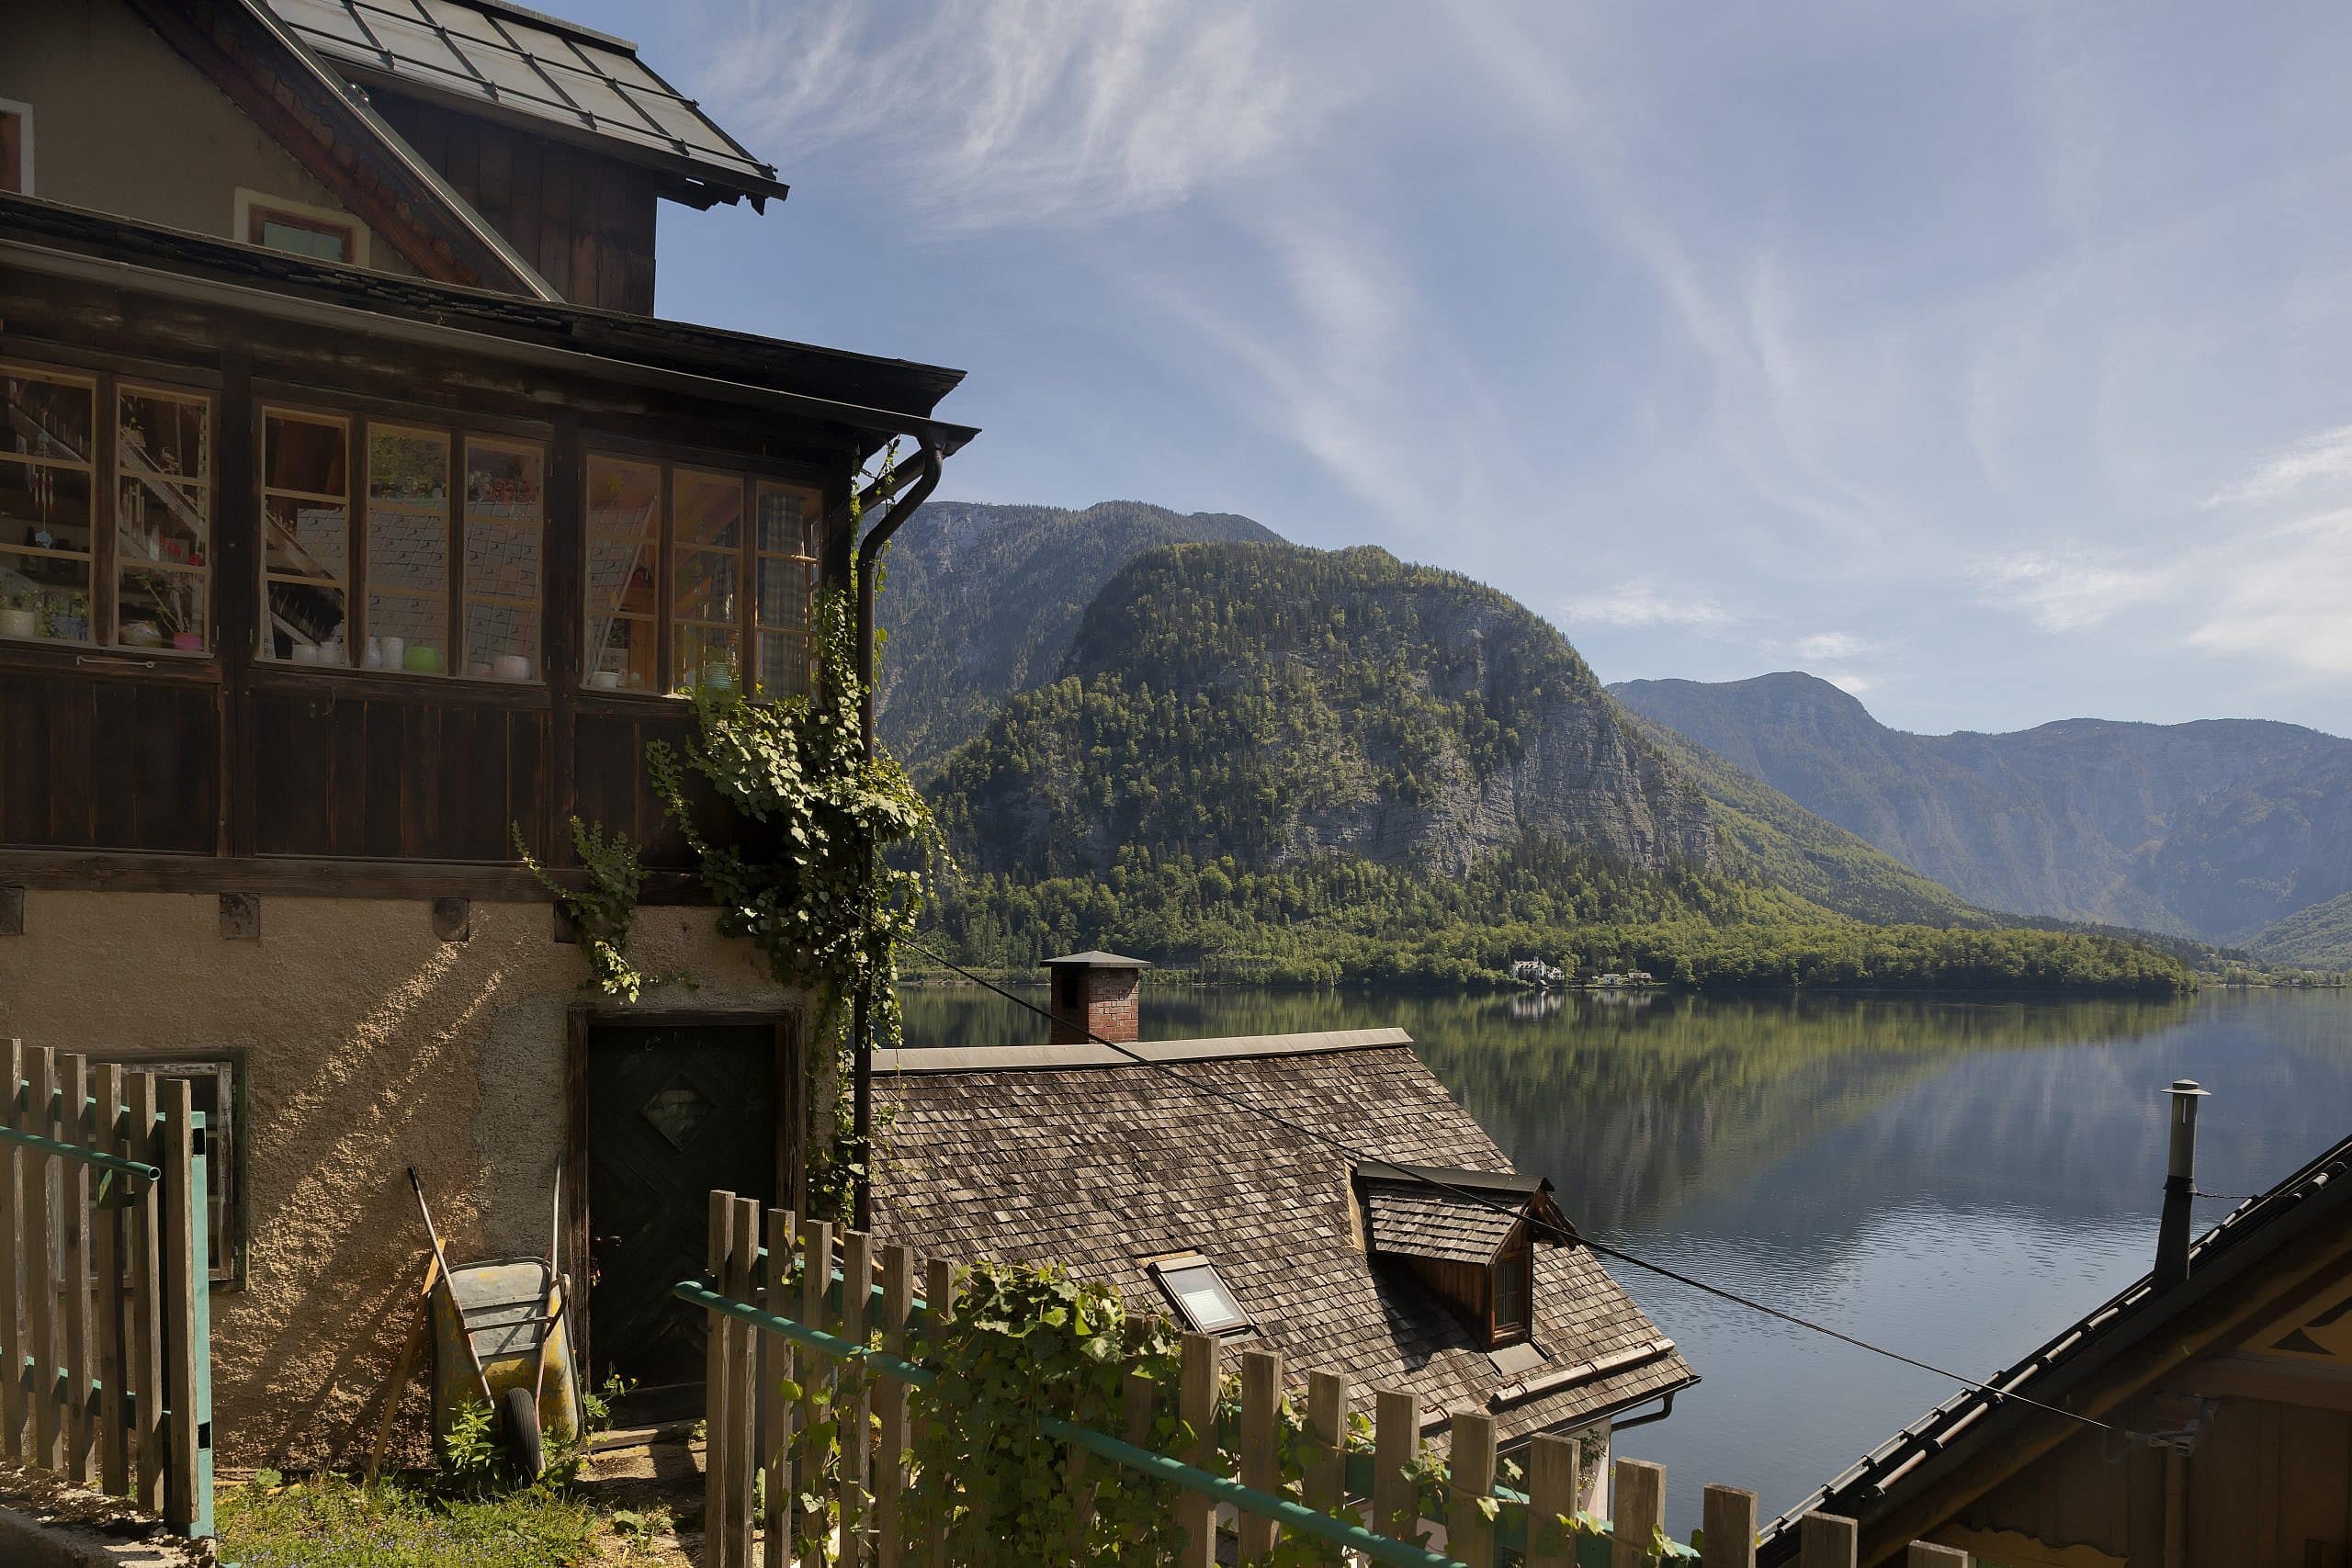 Houses perched on the hill overlooking Hallstattersee